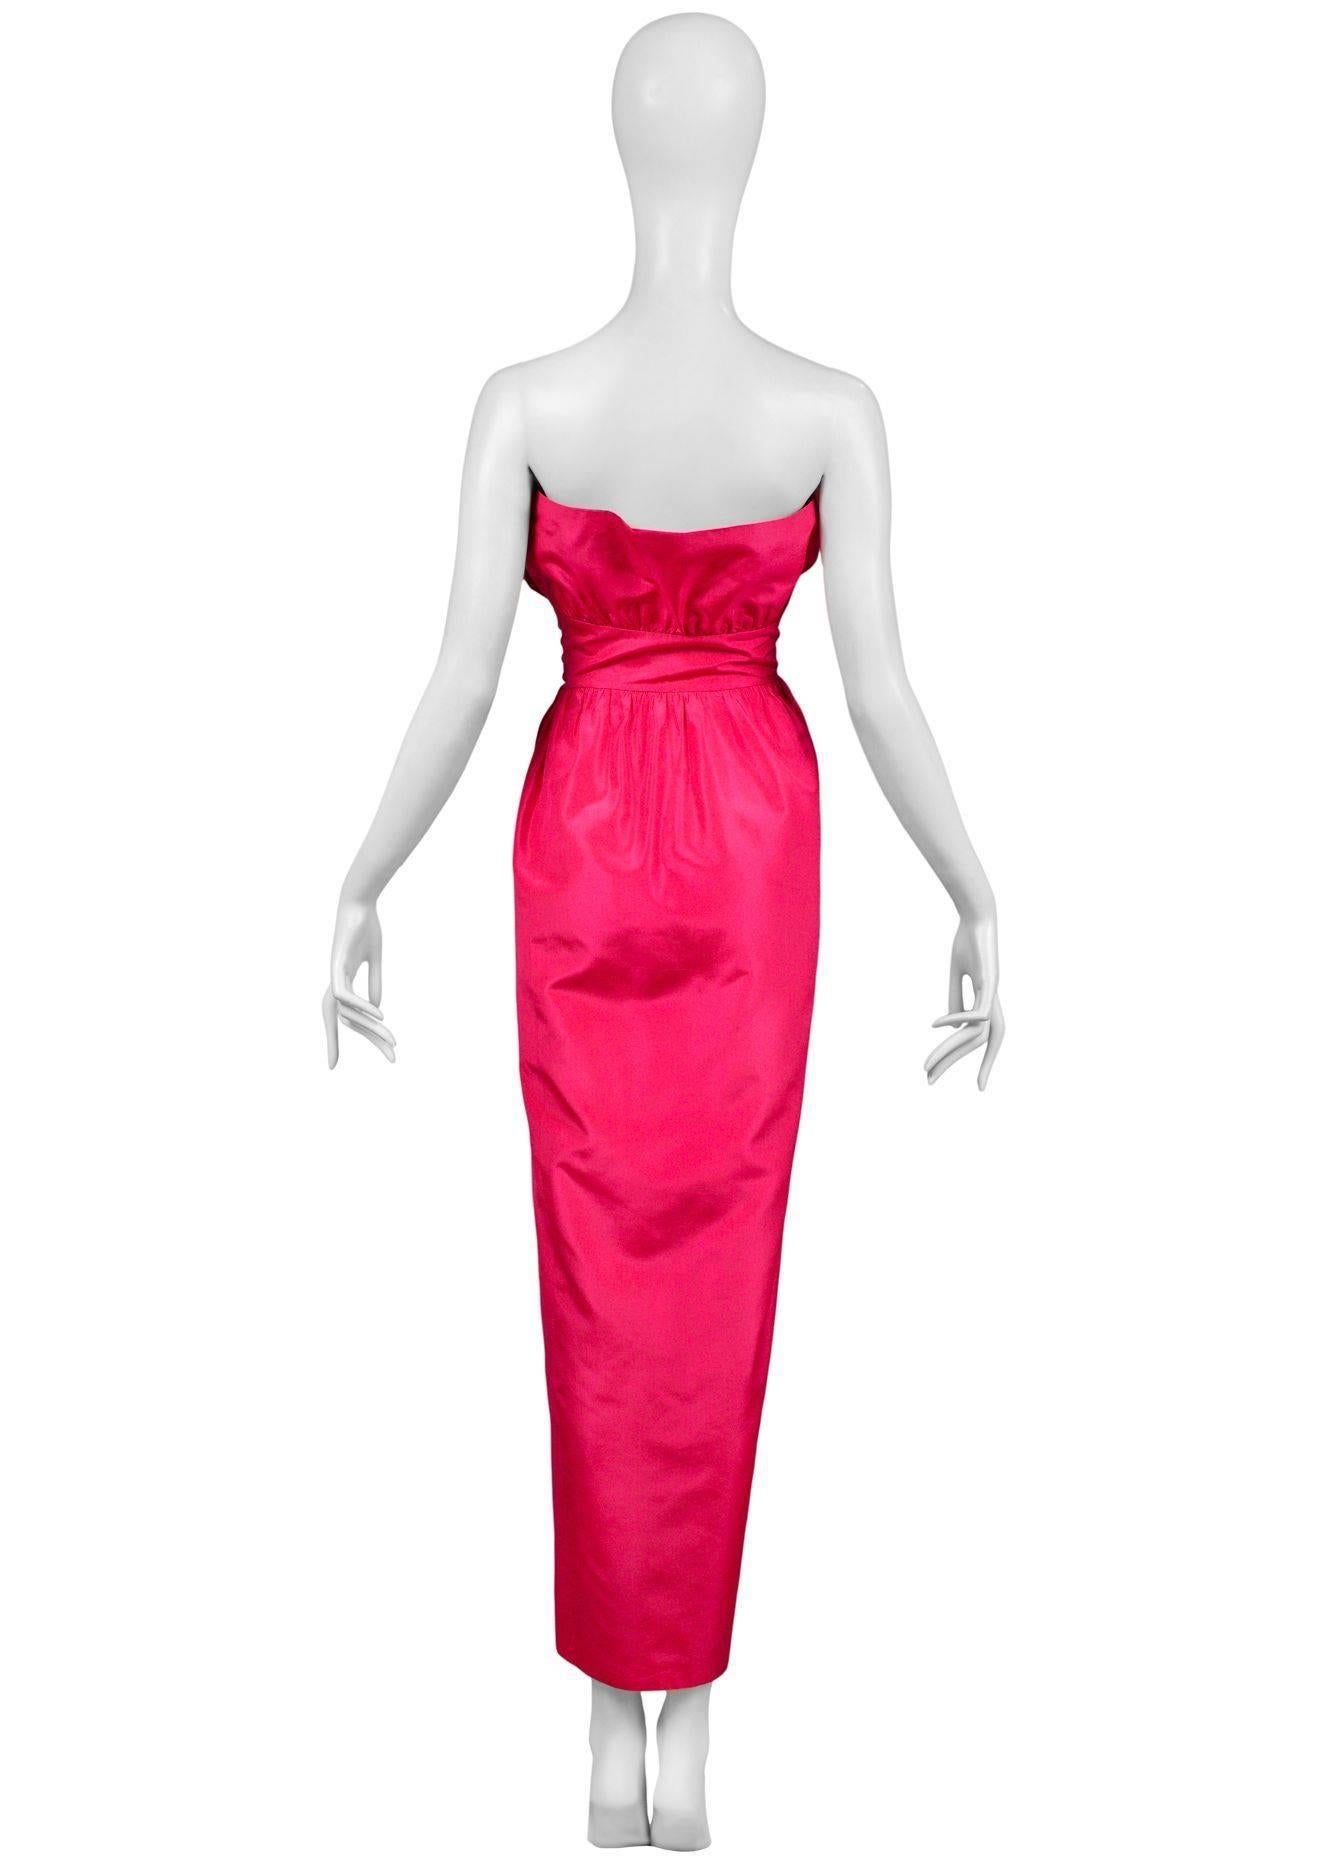 Vintage Lanvin fuchsia taffeta strapless gown featuring a fitted side button waist, tulip style skirt, and gathering below the bust and above the waist to give the bust it's petal like shape. 